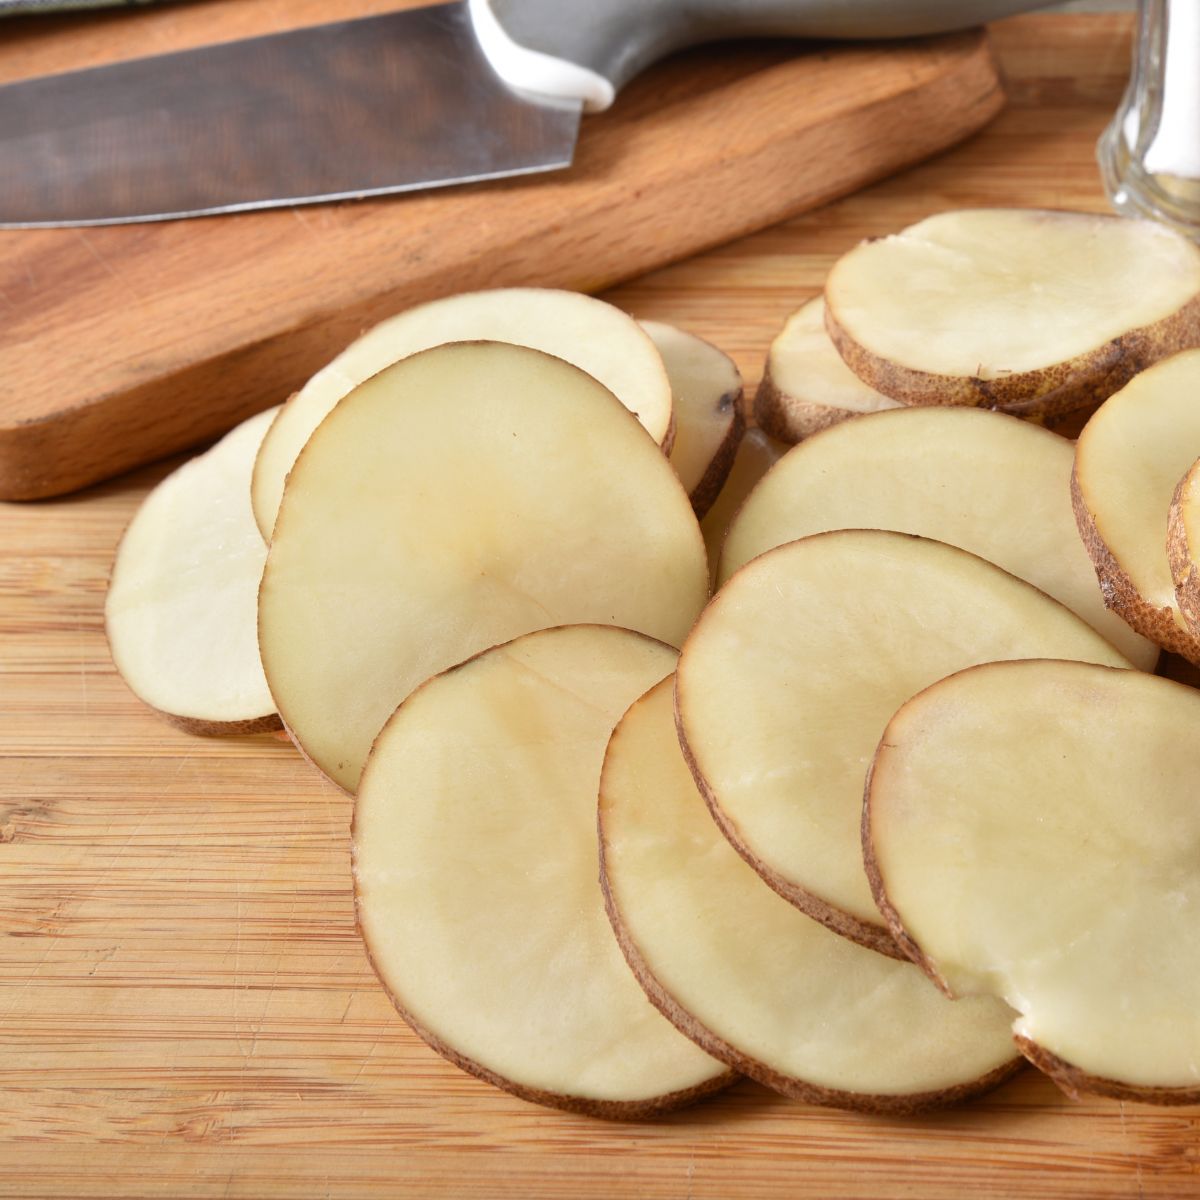 Step 1 of Microwave Potato Chips, slice potatoes in thin slices.